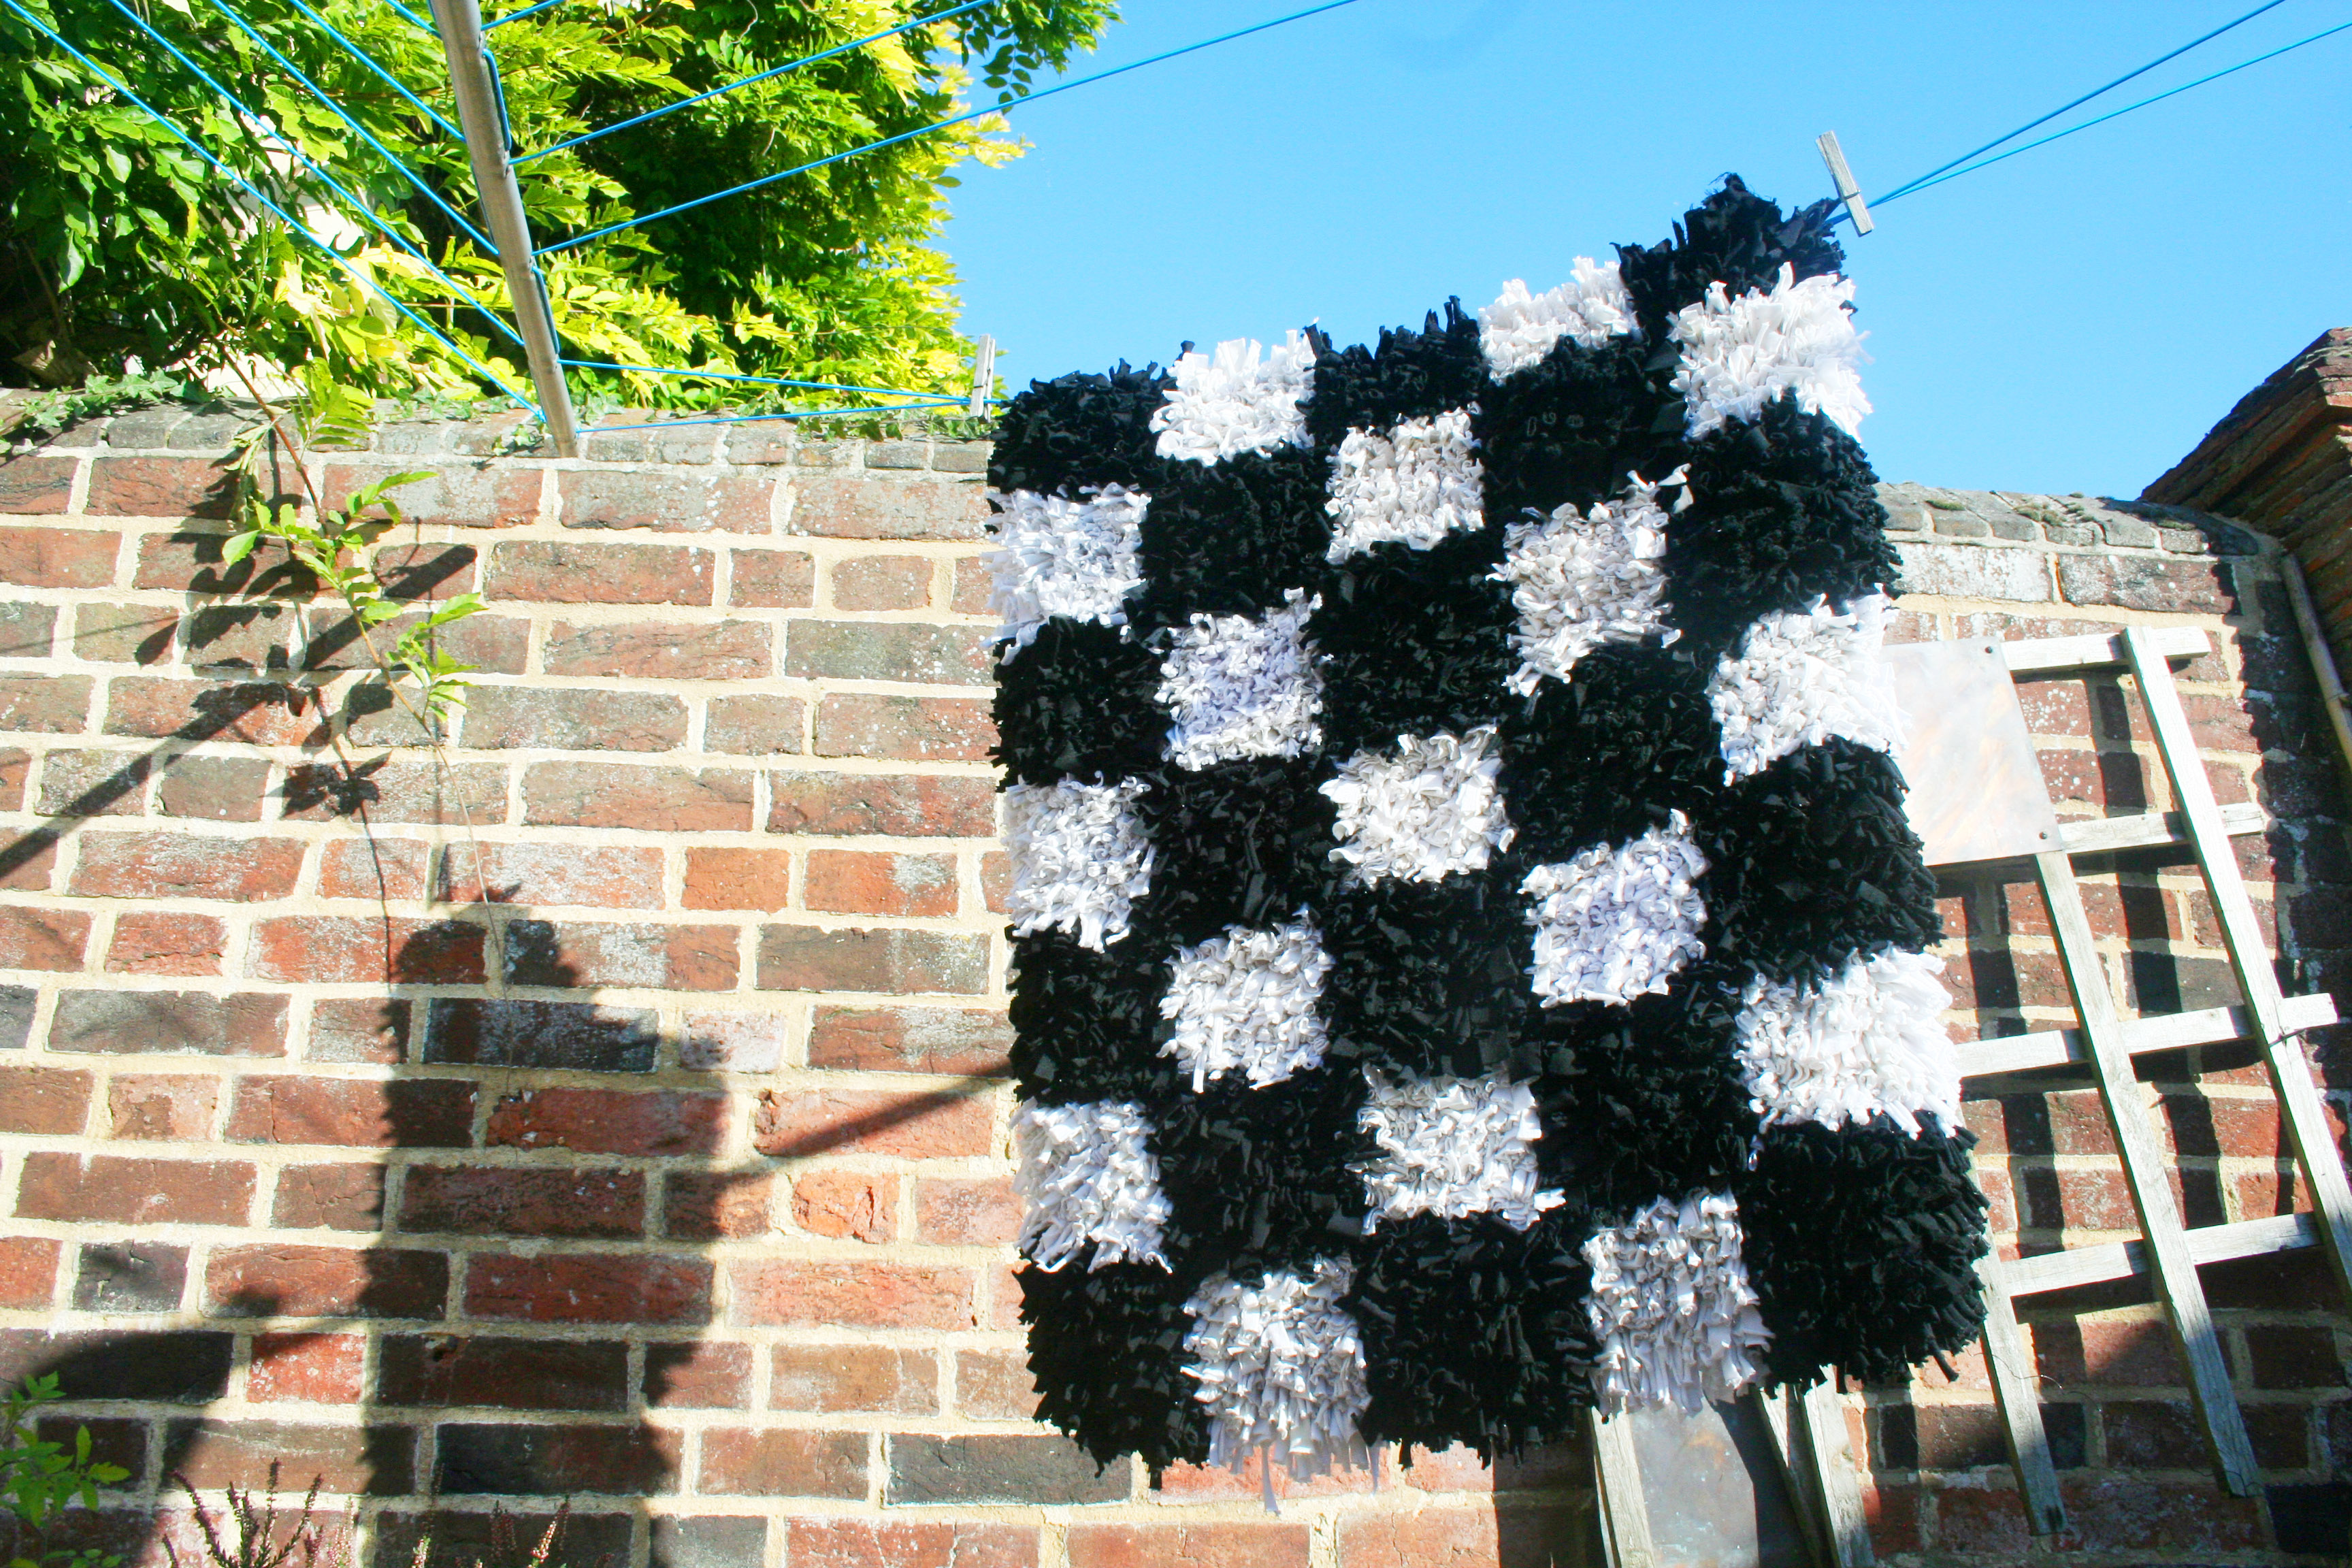 How to clean a rag rug - black and white checked rag rug hanging out to dry on a washing line